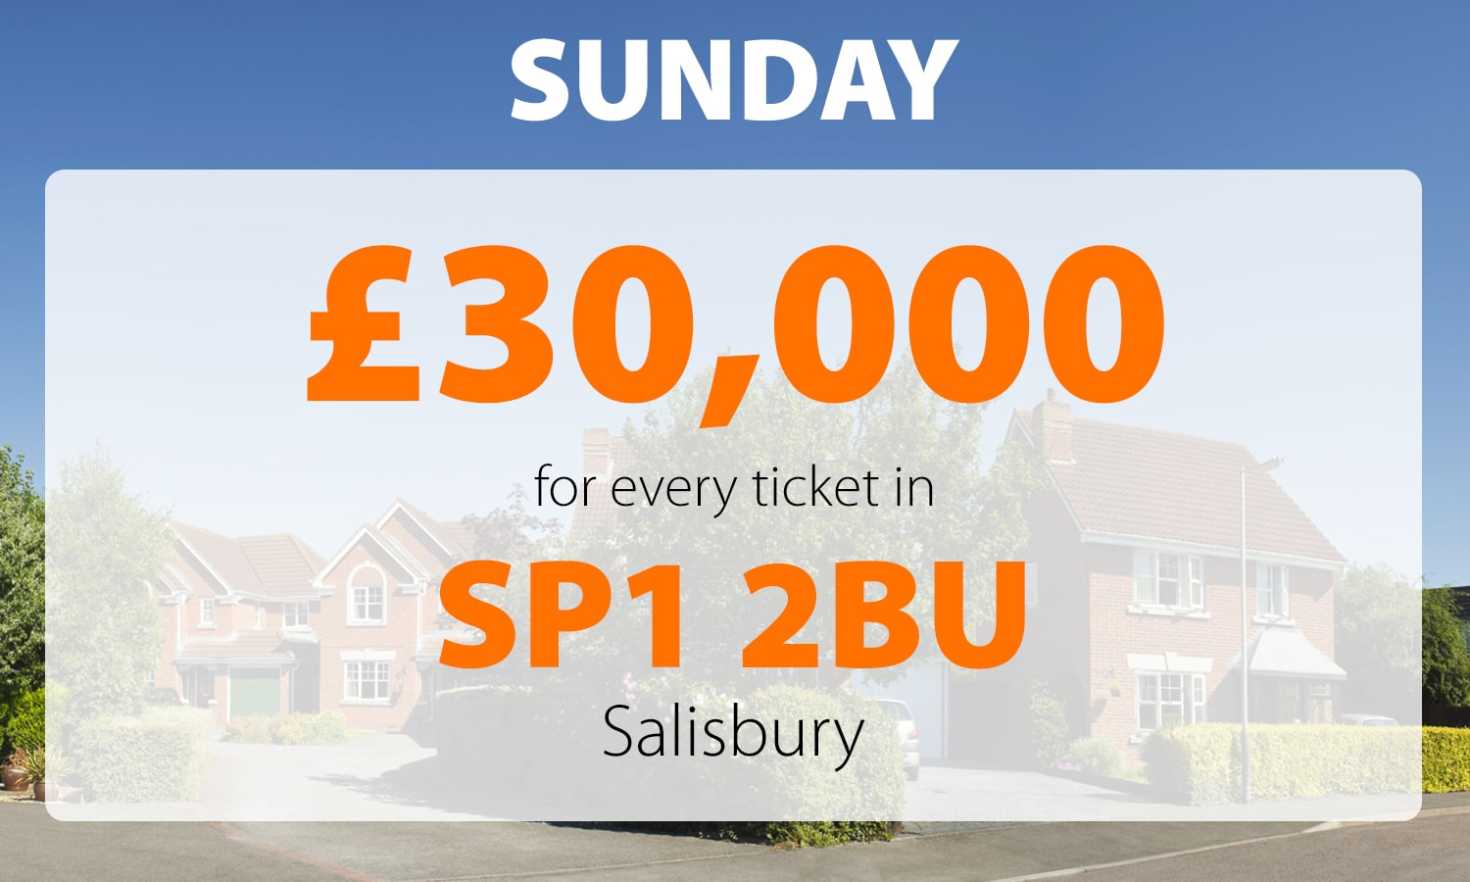 Two neighbours in a lucky postcode have won today's £30,000 Sunday Street Prize